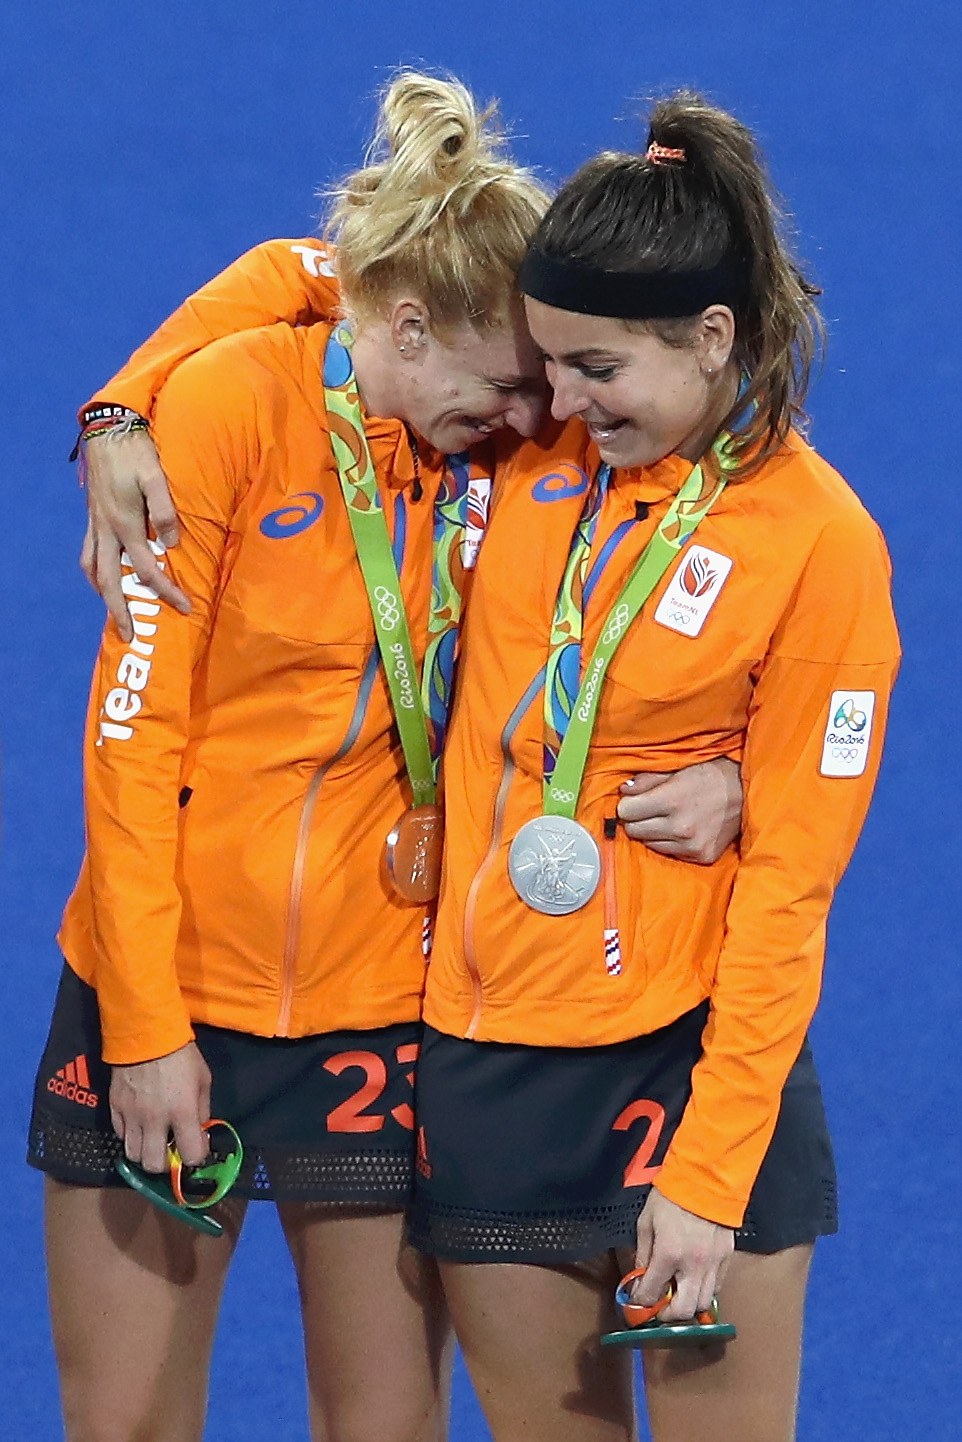 RIO DE JANEIRO, BRAZIL - AUGUST 19: Margot van Geffen #23 (L) and Eva de Goede #24 of Netherlands react on the podium after winning silver medals in the Women's Hockey Final match against Great Britain on Day 14 of the Rio 2016 Olympic Games at the Olympic Hockey Centre on August 19, 2016 in Rio de Janeiro, Brazil. (Photo by Mark Kolbe/Getty Images)